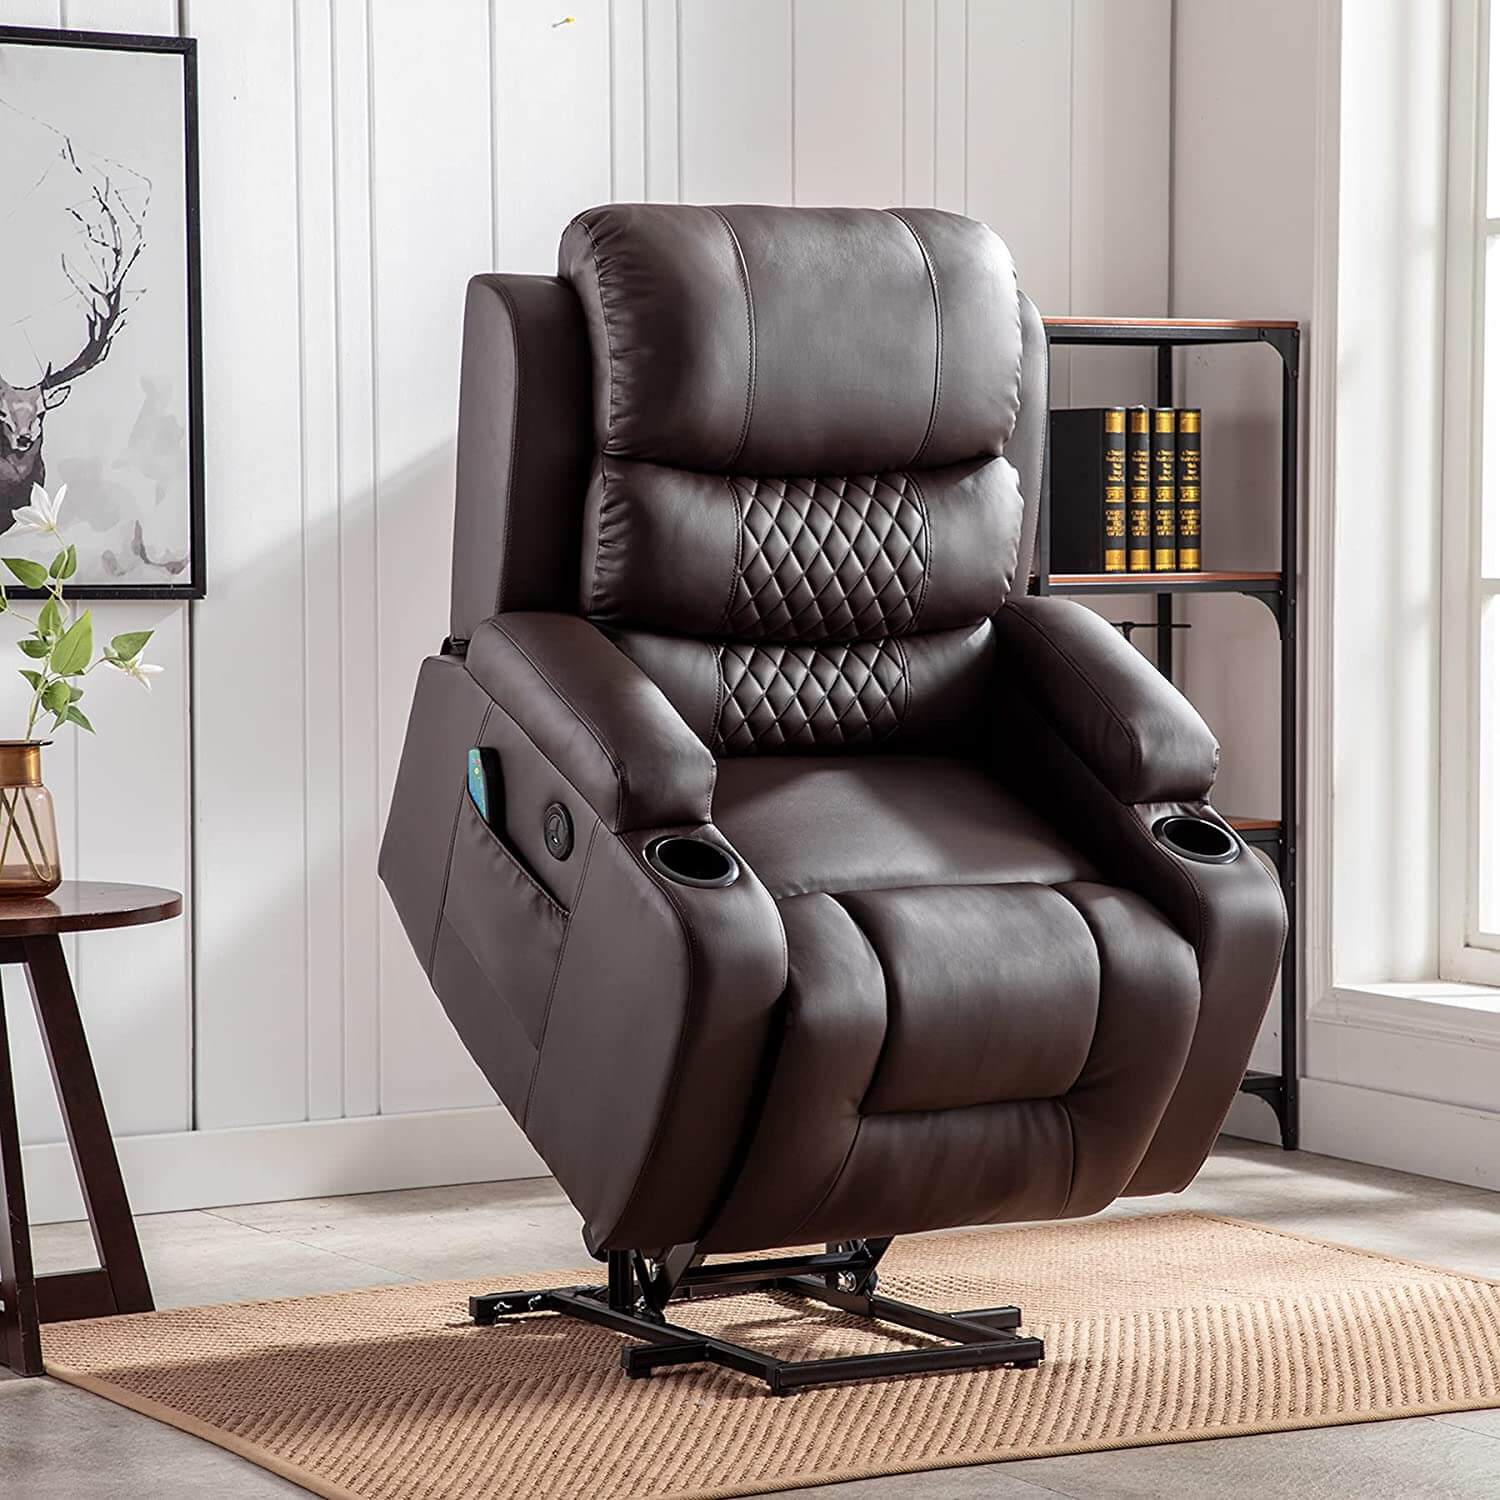 homrest-power-lift-recliner-chair-with-heated-vibration-massage-for-elderly-146brown